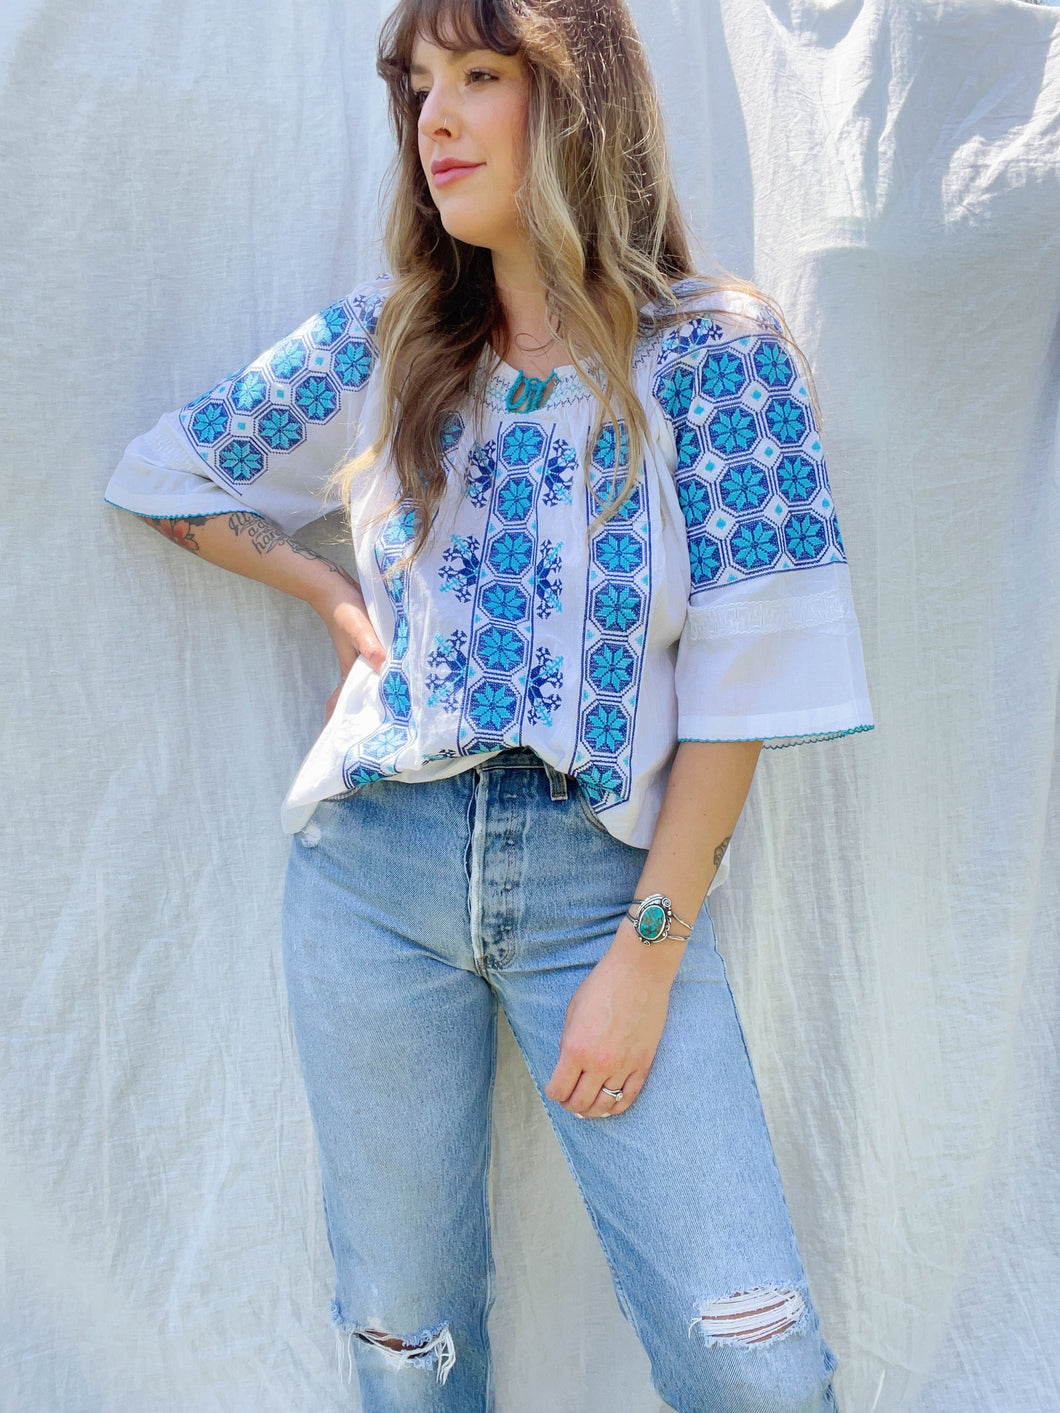 Vintage embroidered top